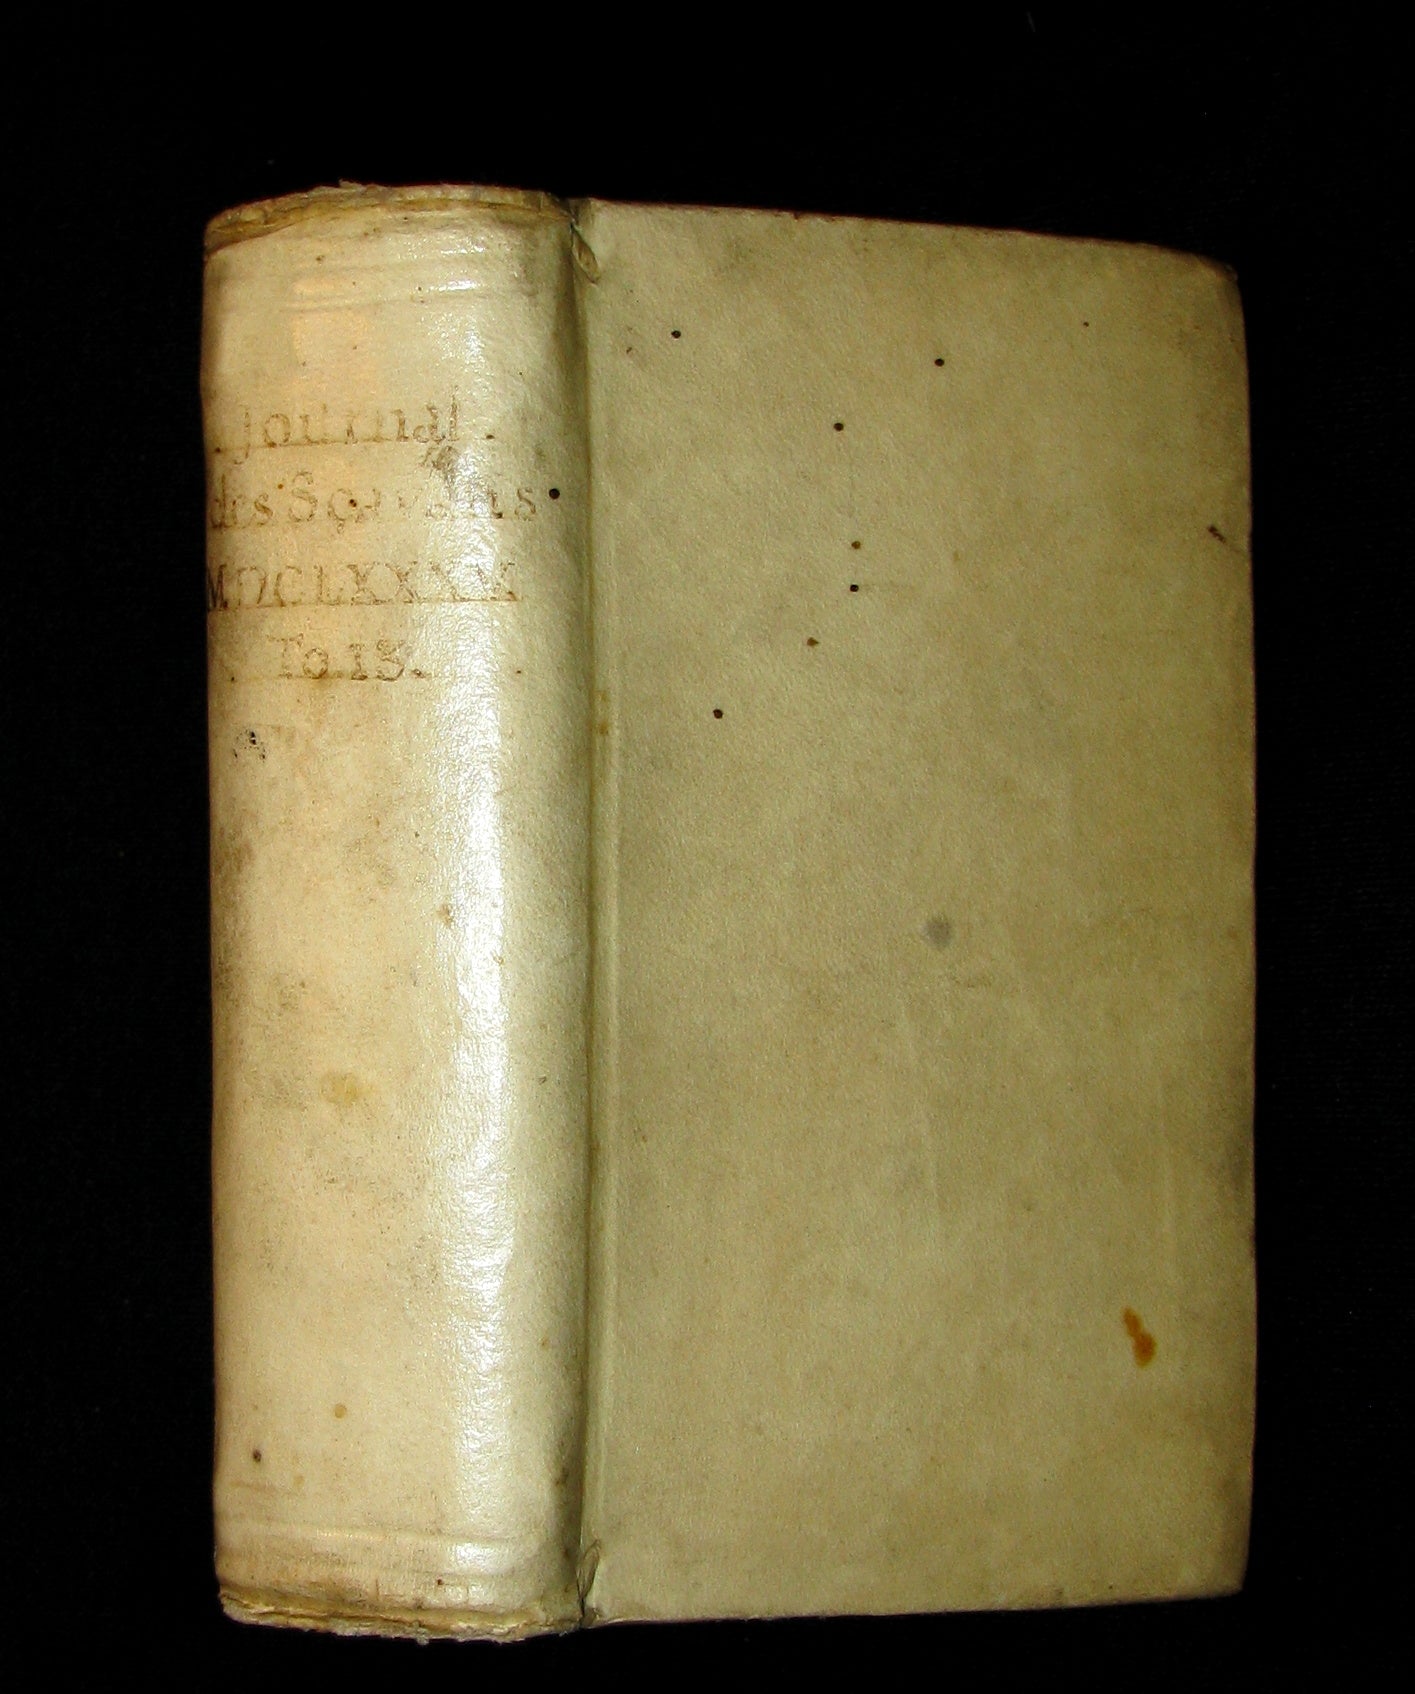 1686 Rare French Book - Scientists' Journal for year 1685 - lunar eclipse & various subjects